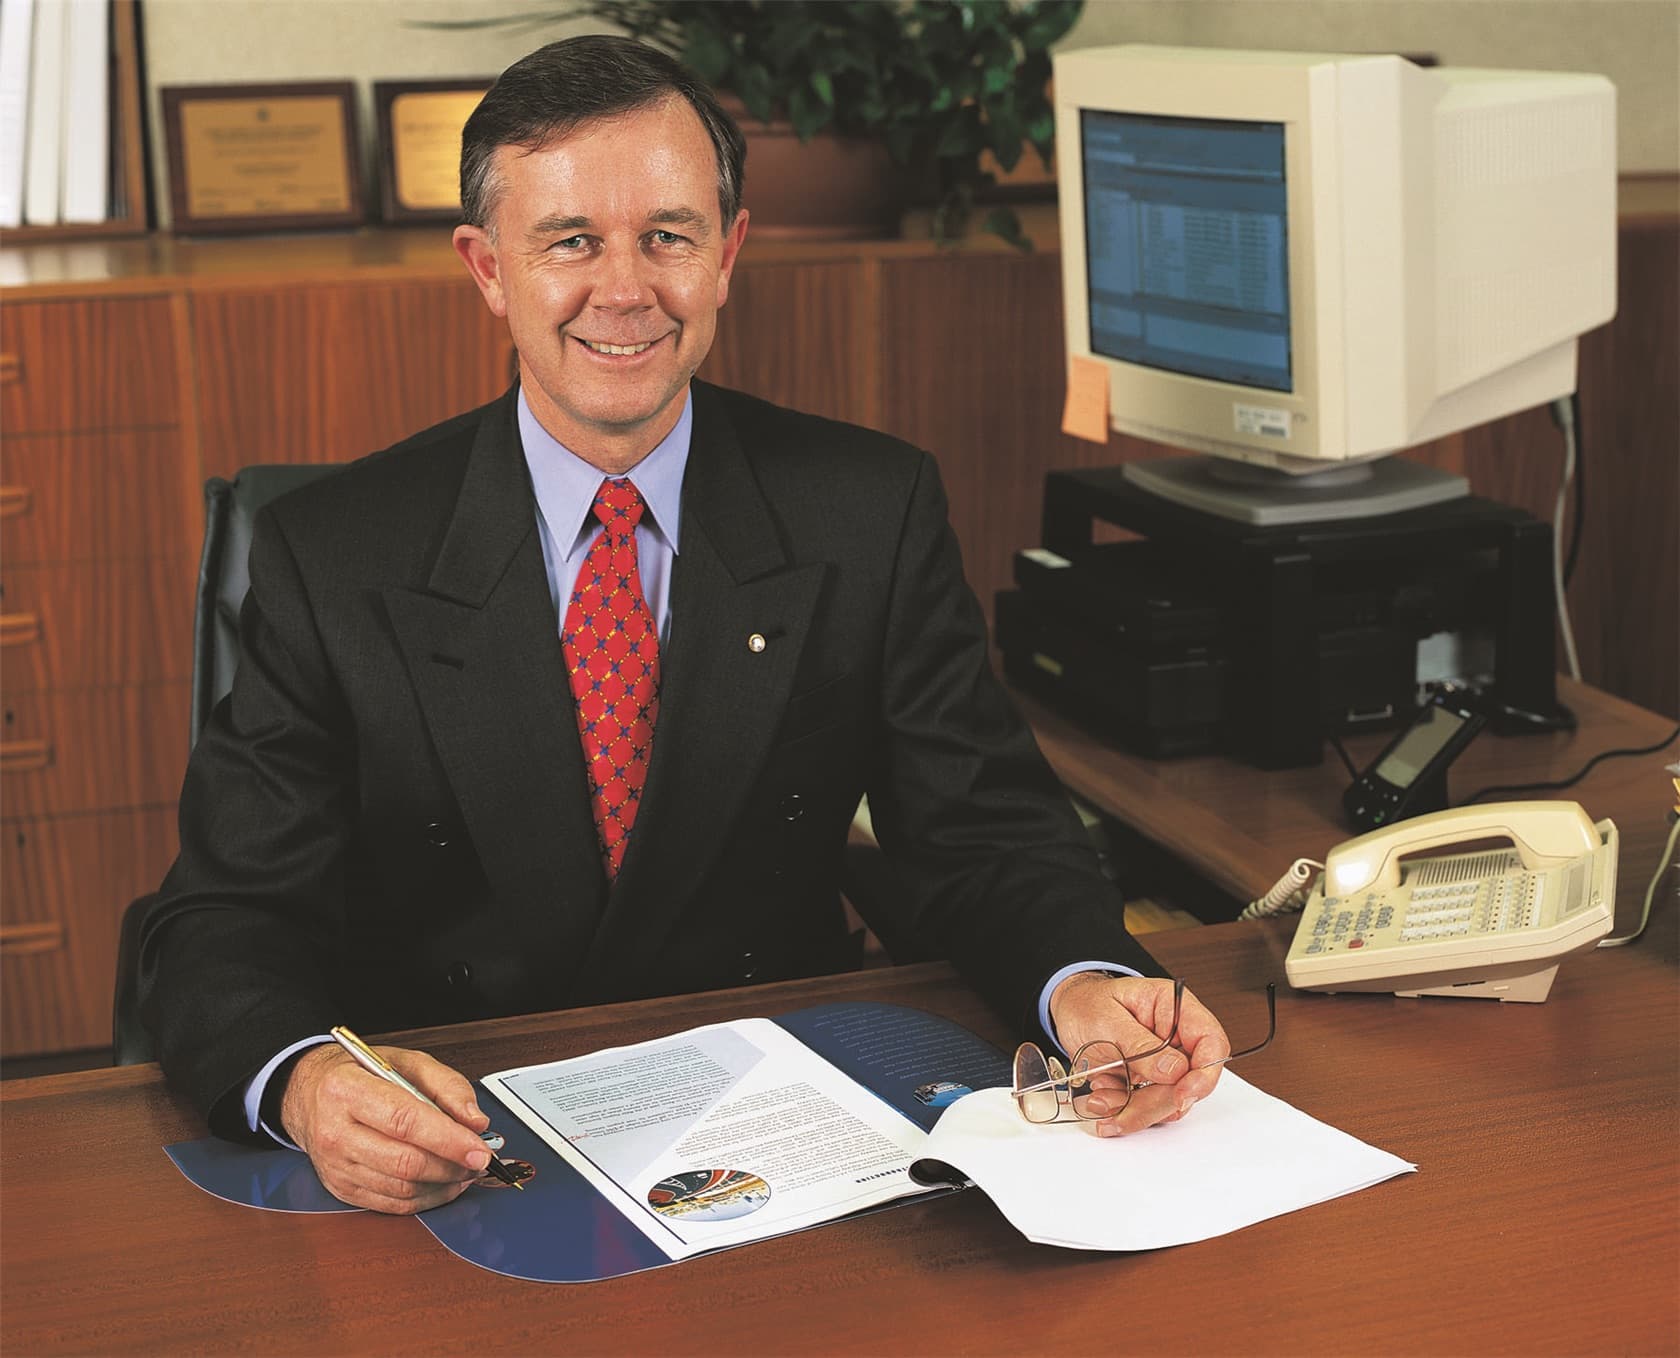 Greg Martin - Commissioner from 2000 to 2002